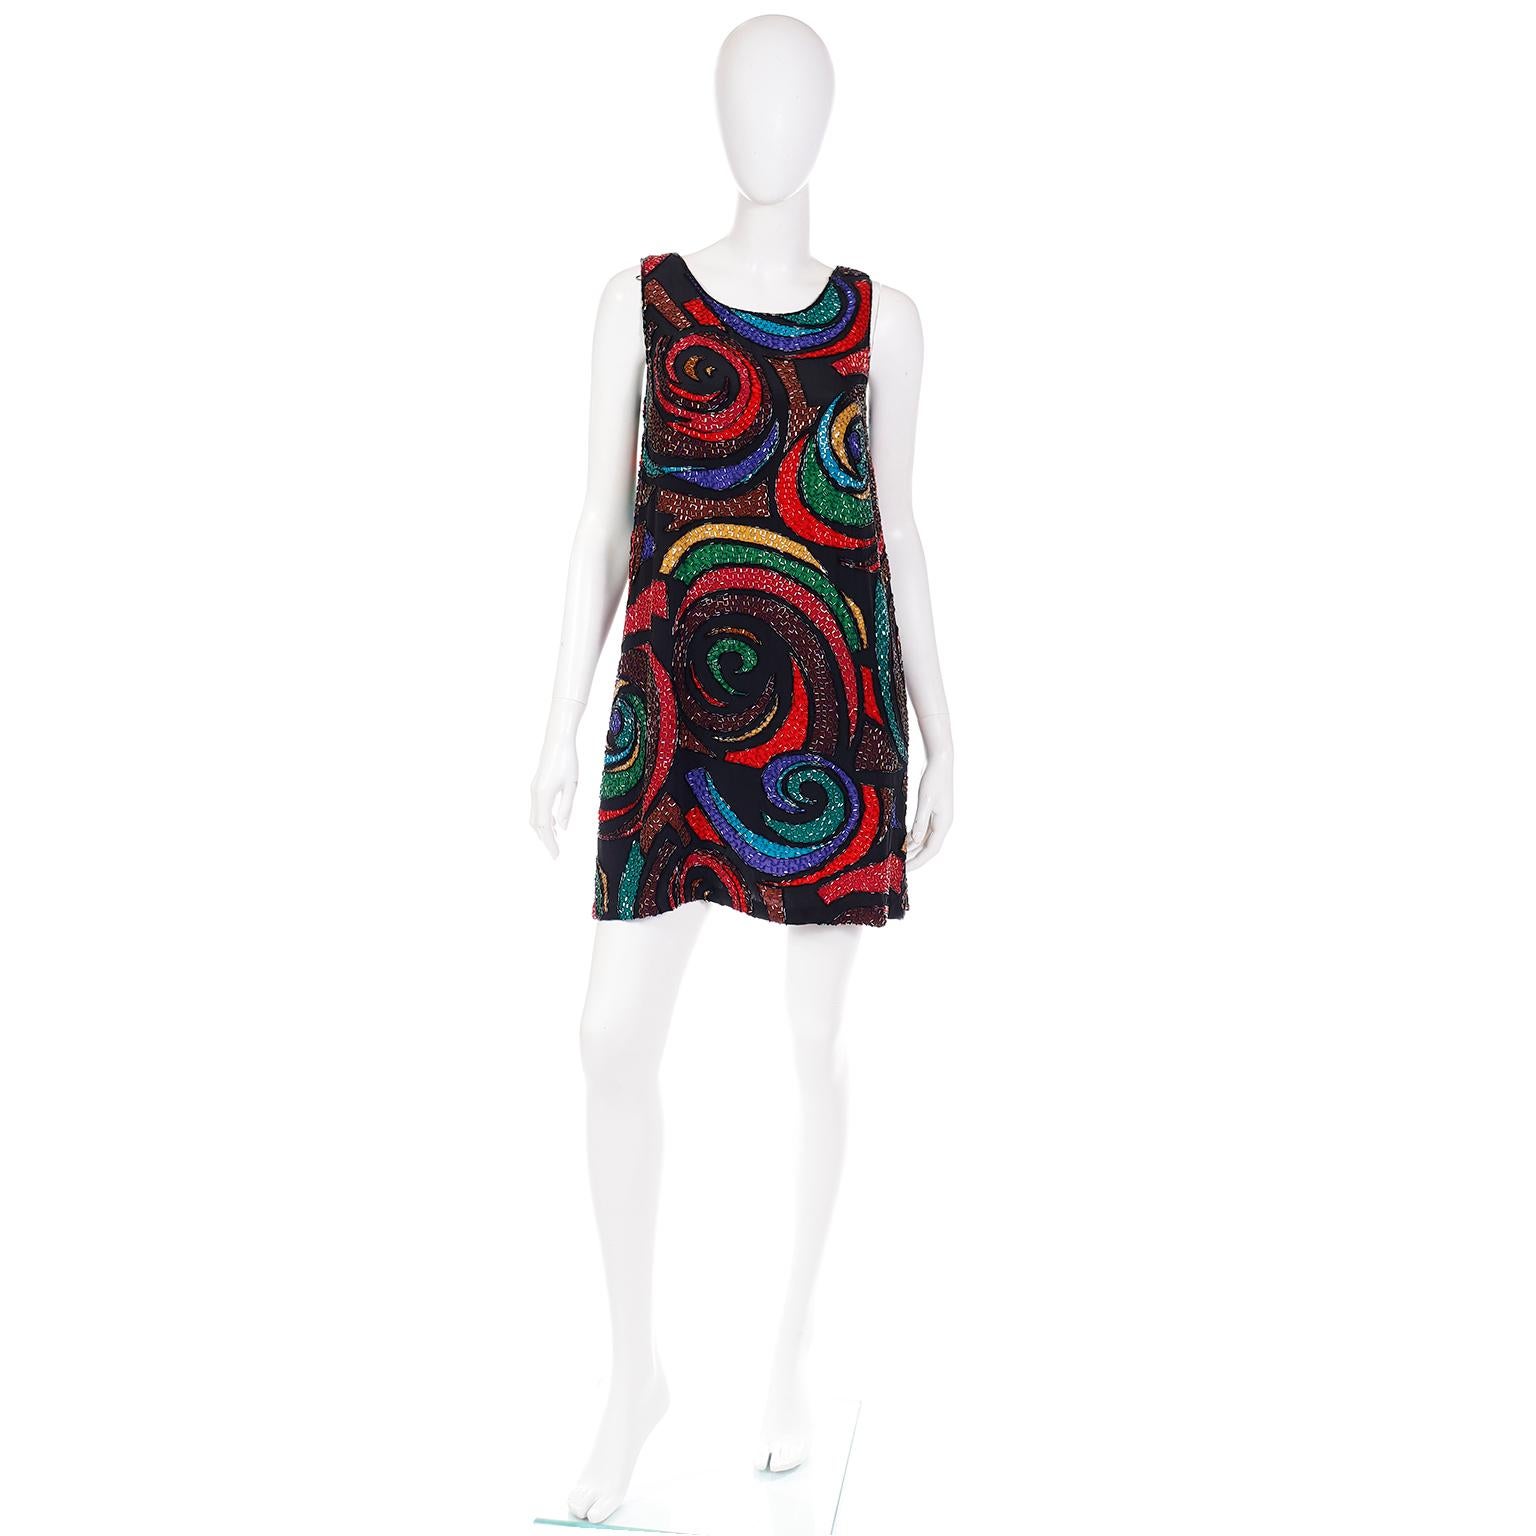 This is a fun vintage dress from Oleg Cassini for Black Tie that is covered in bugle beads that define a multi colored swirl pattern print in shades of blue, red, purple, pink, yellow and black.. There is a center back zipper for closure and the